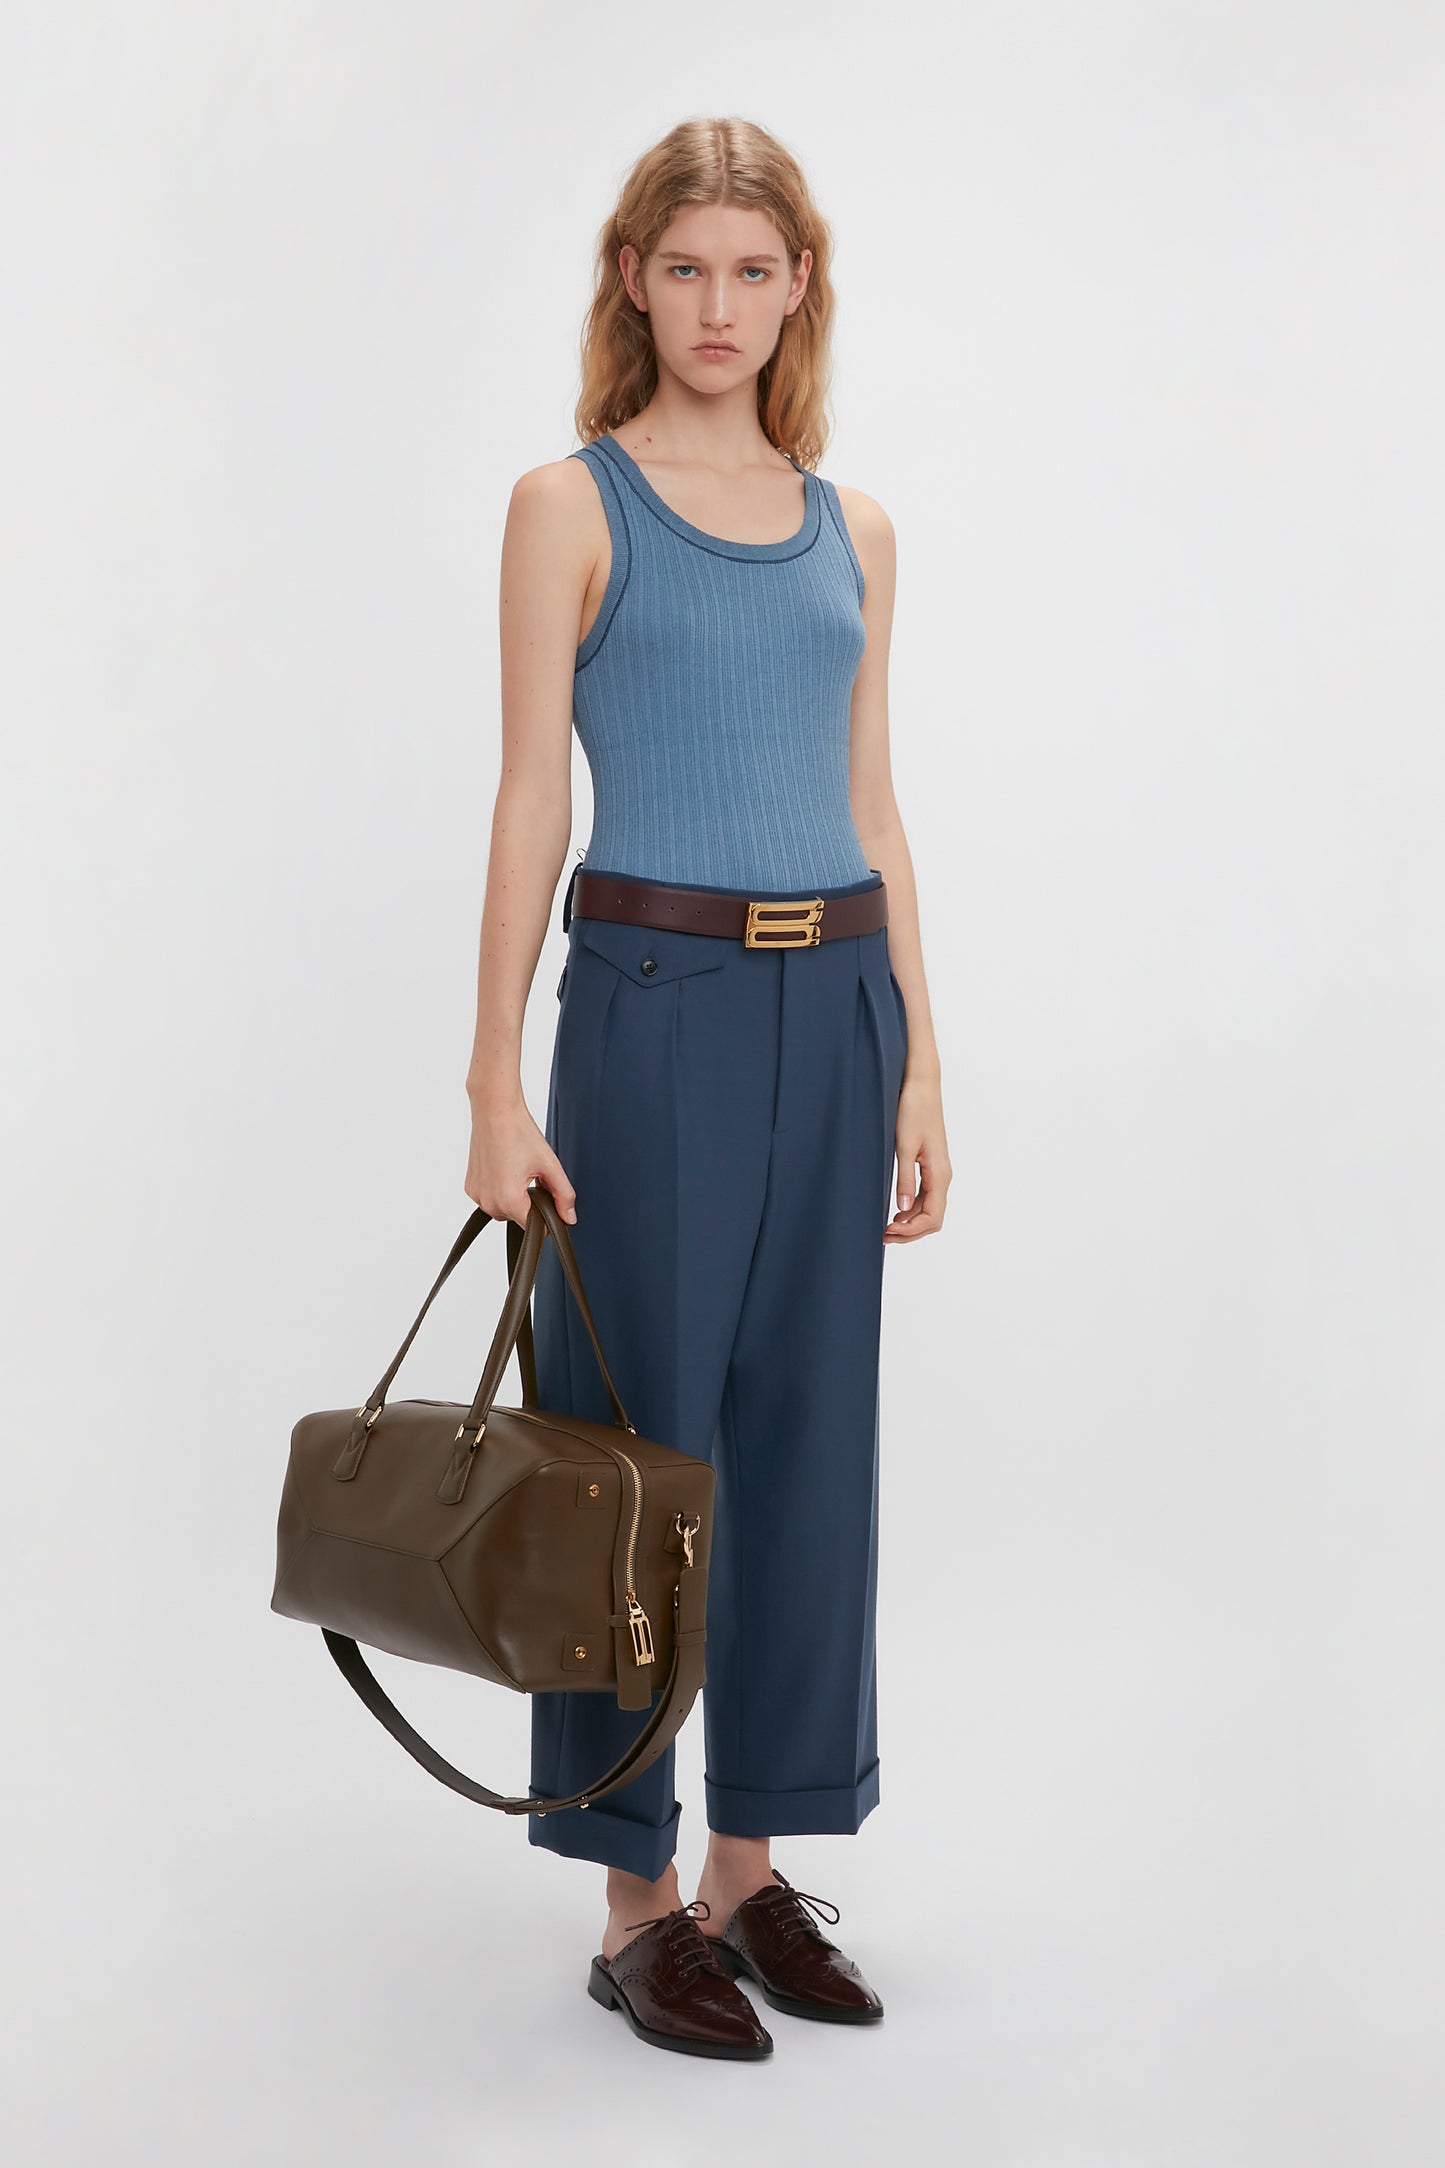 A woman in a blue fine knit tank top and Victoria Beckham navy wide leg cropped trousers with a brown belt, holding a large brown handbag, standing against a white background.